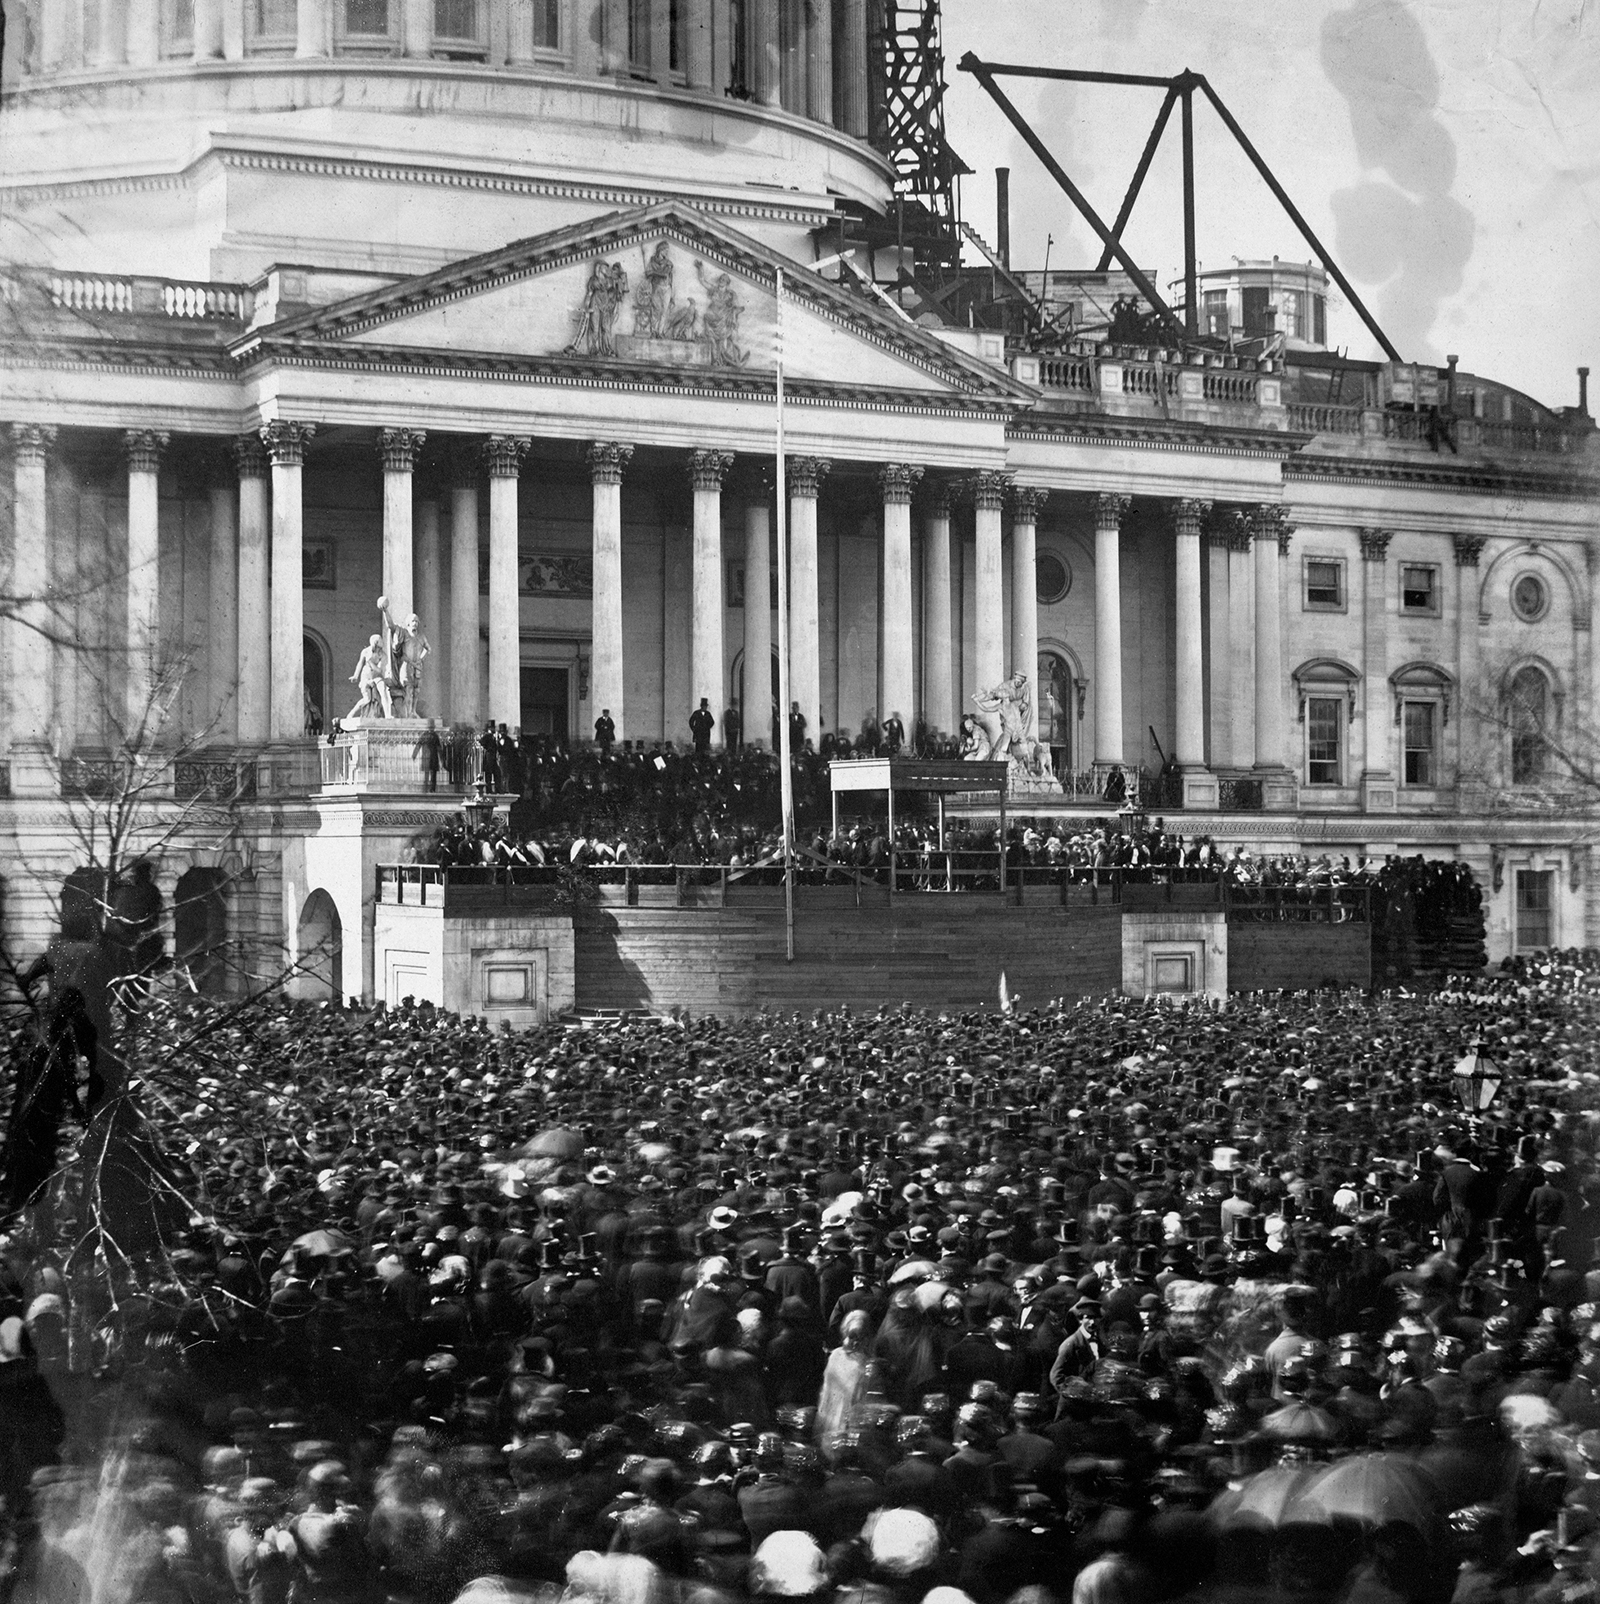 The Inauguration of Abraham Lincoln in 1861